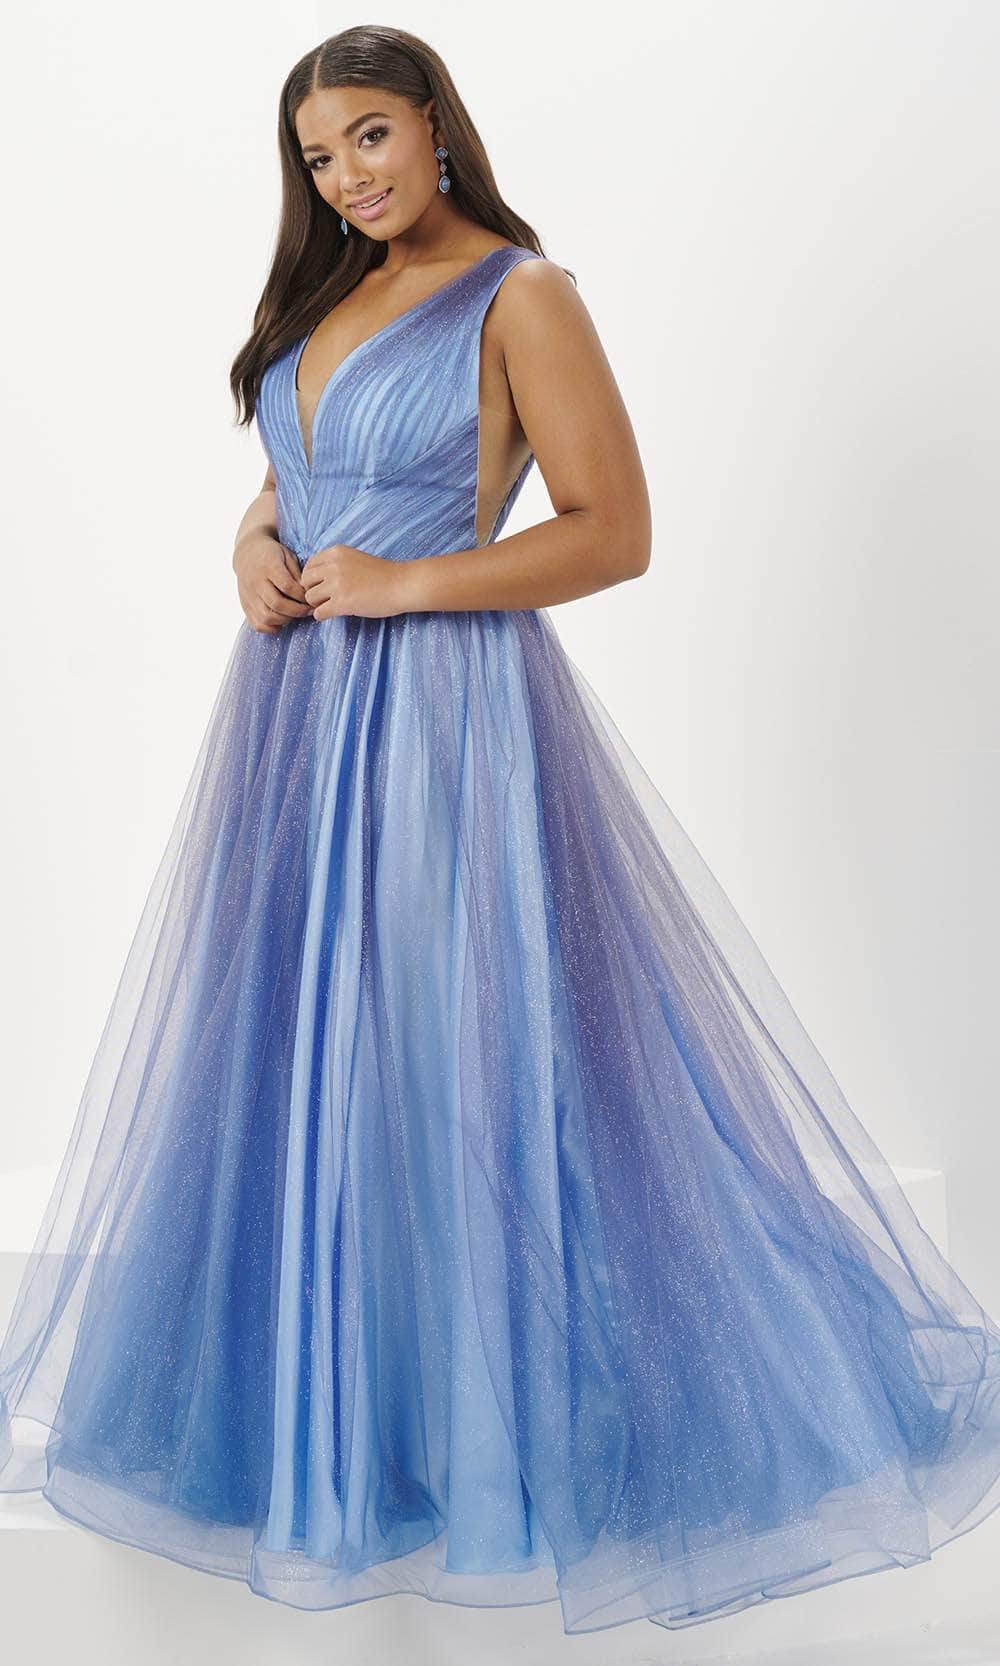 Tiffany Designs 16134 - Plunging V-Neck Glitter Ombre Ballgown Ball Gowns